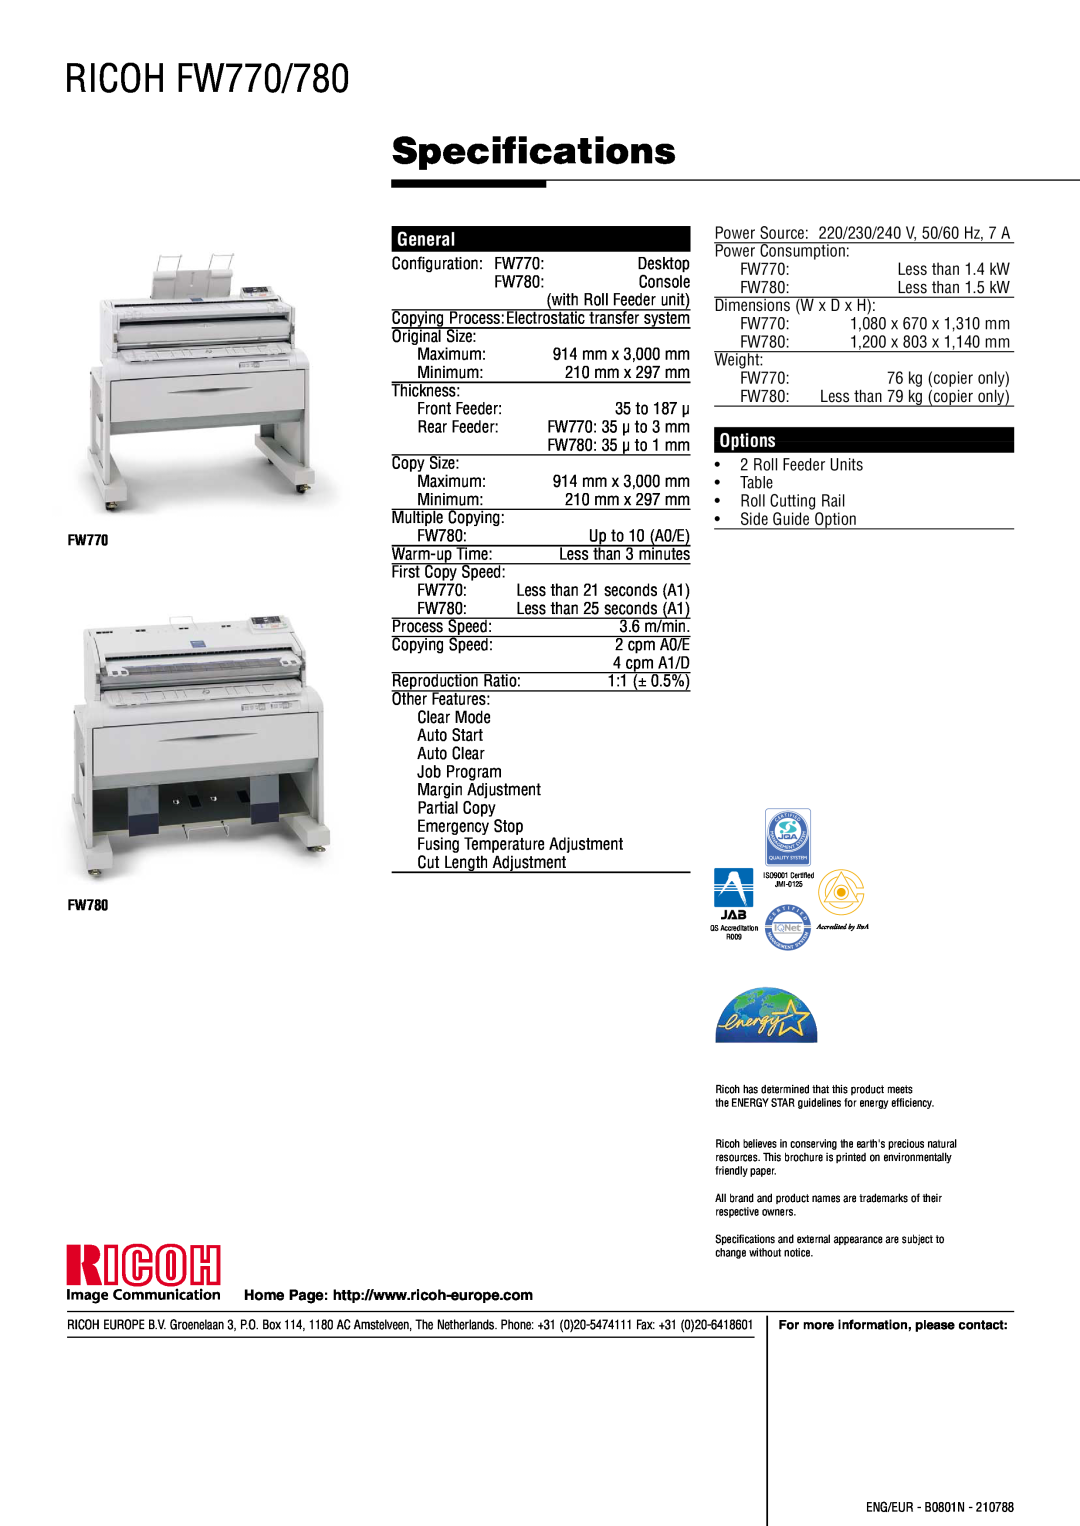 Ricoh FW780 manual Specifications, RICOH FW770/780, General, Options 